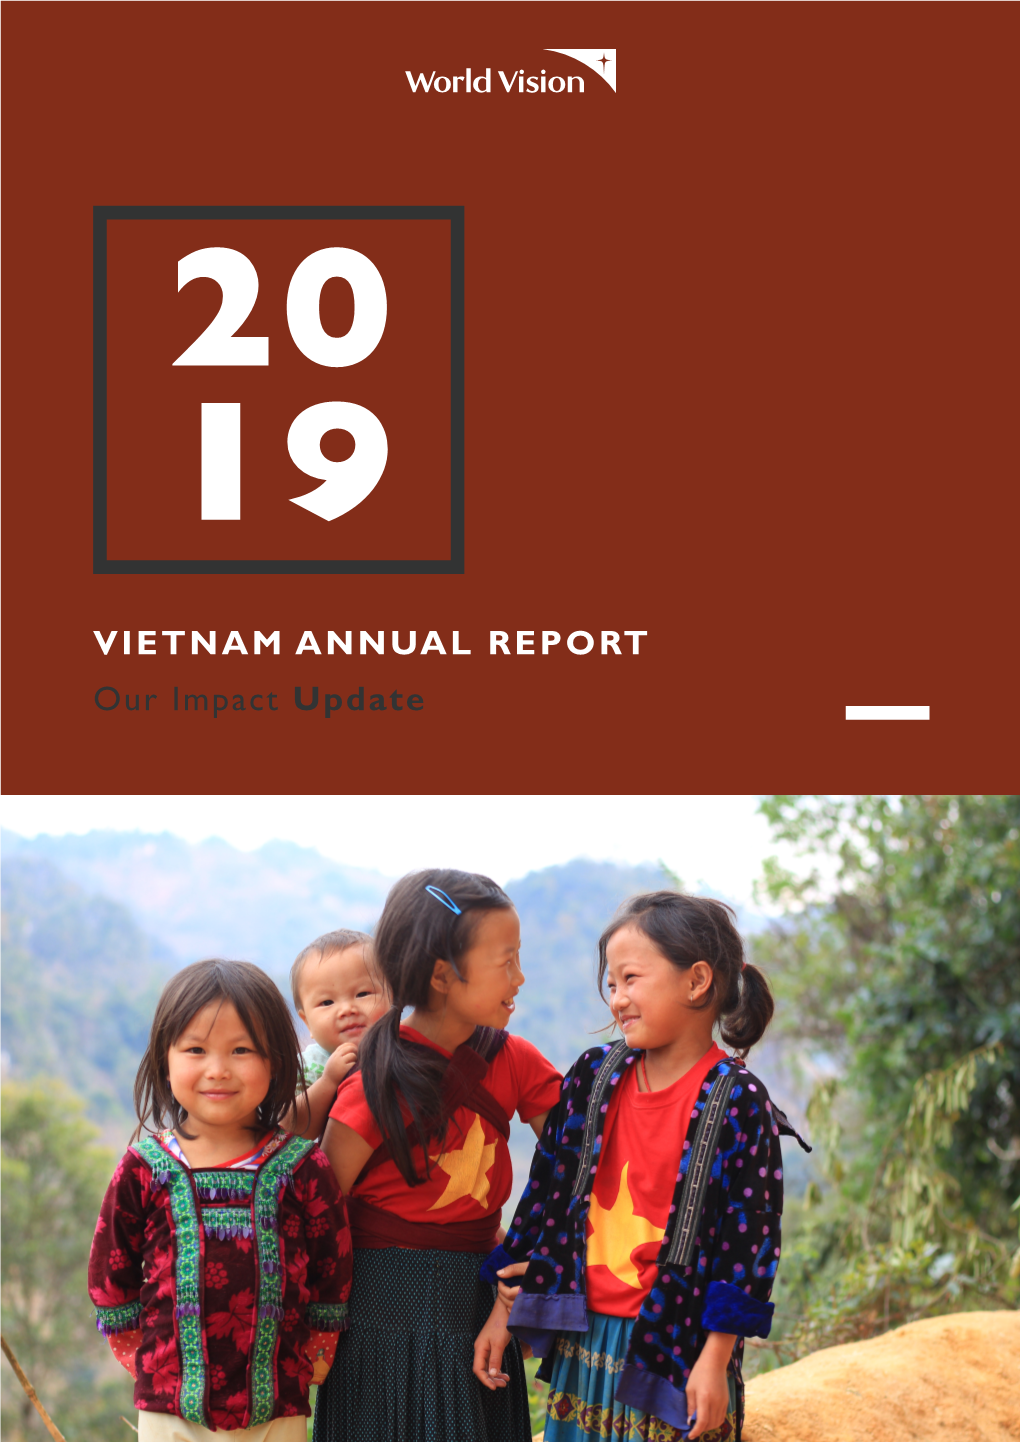 VIETNAM ANNUAL REPORT Our Impact Update Message from 01 National Director